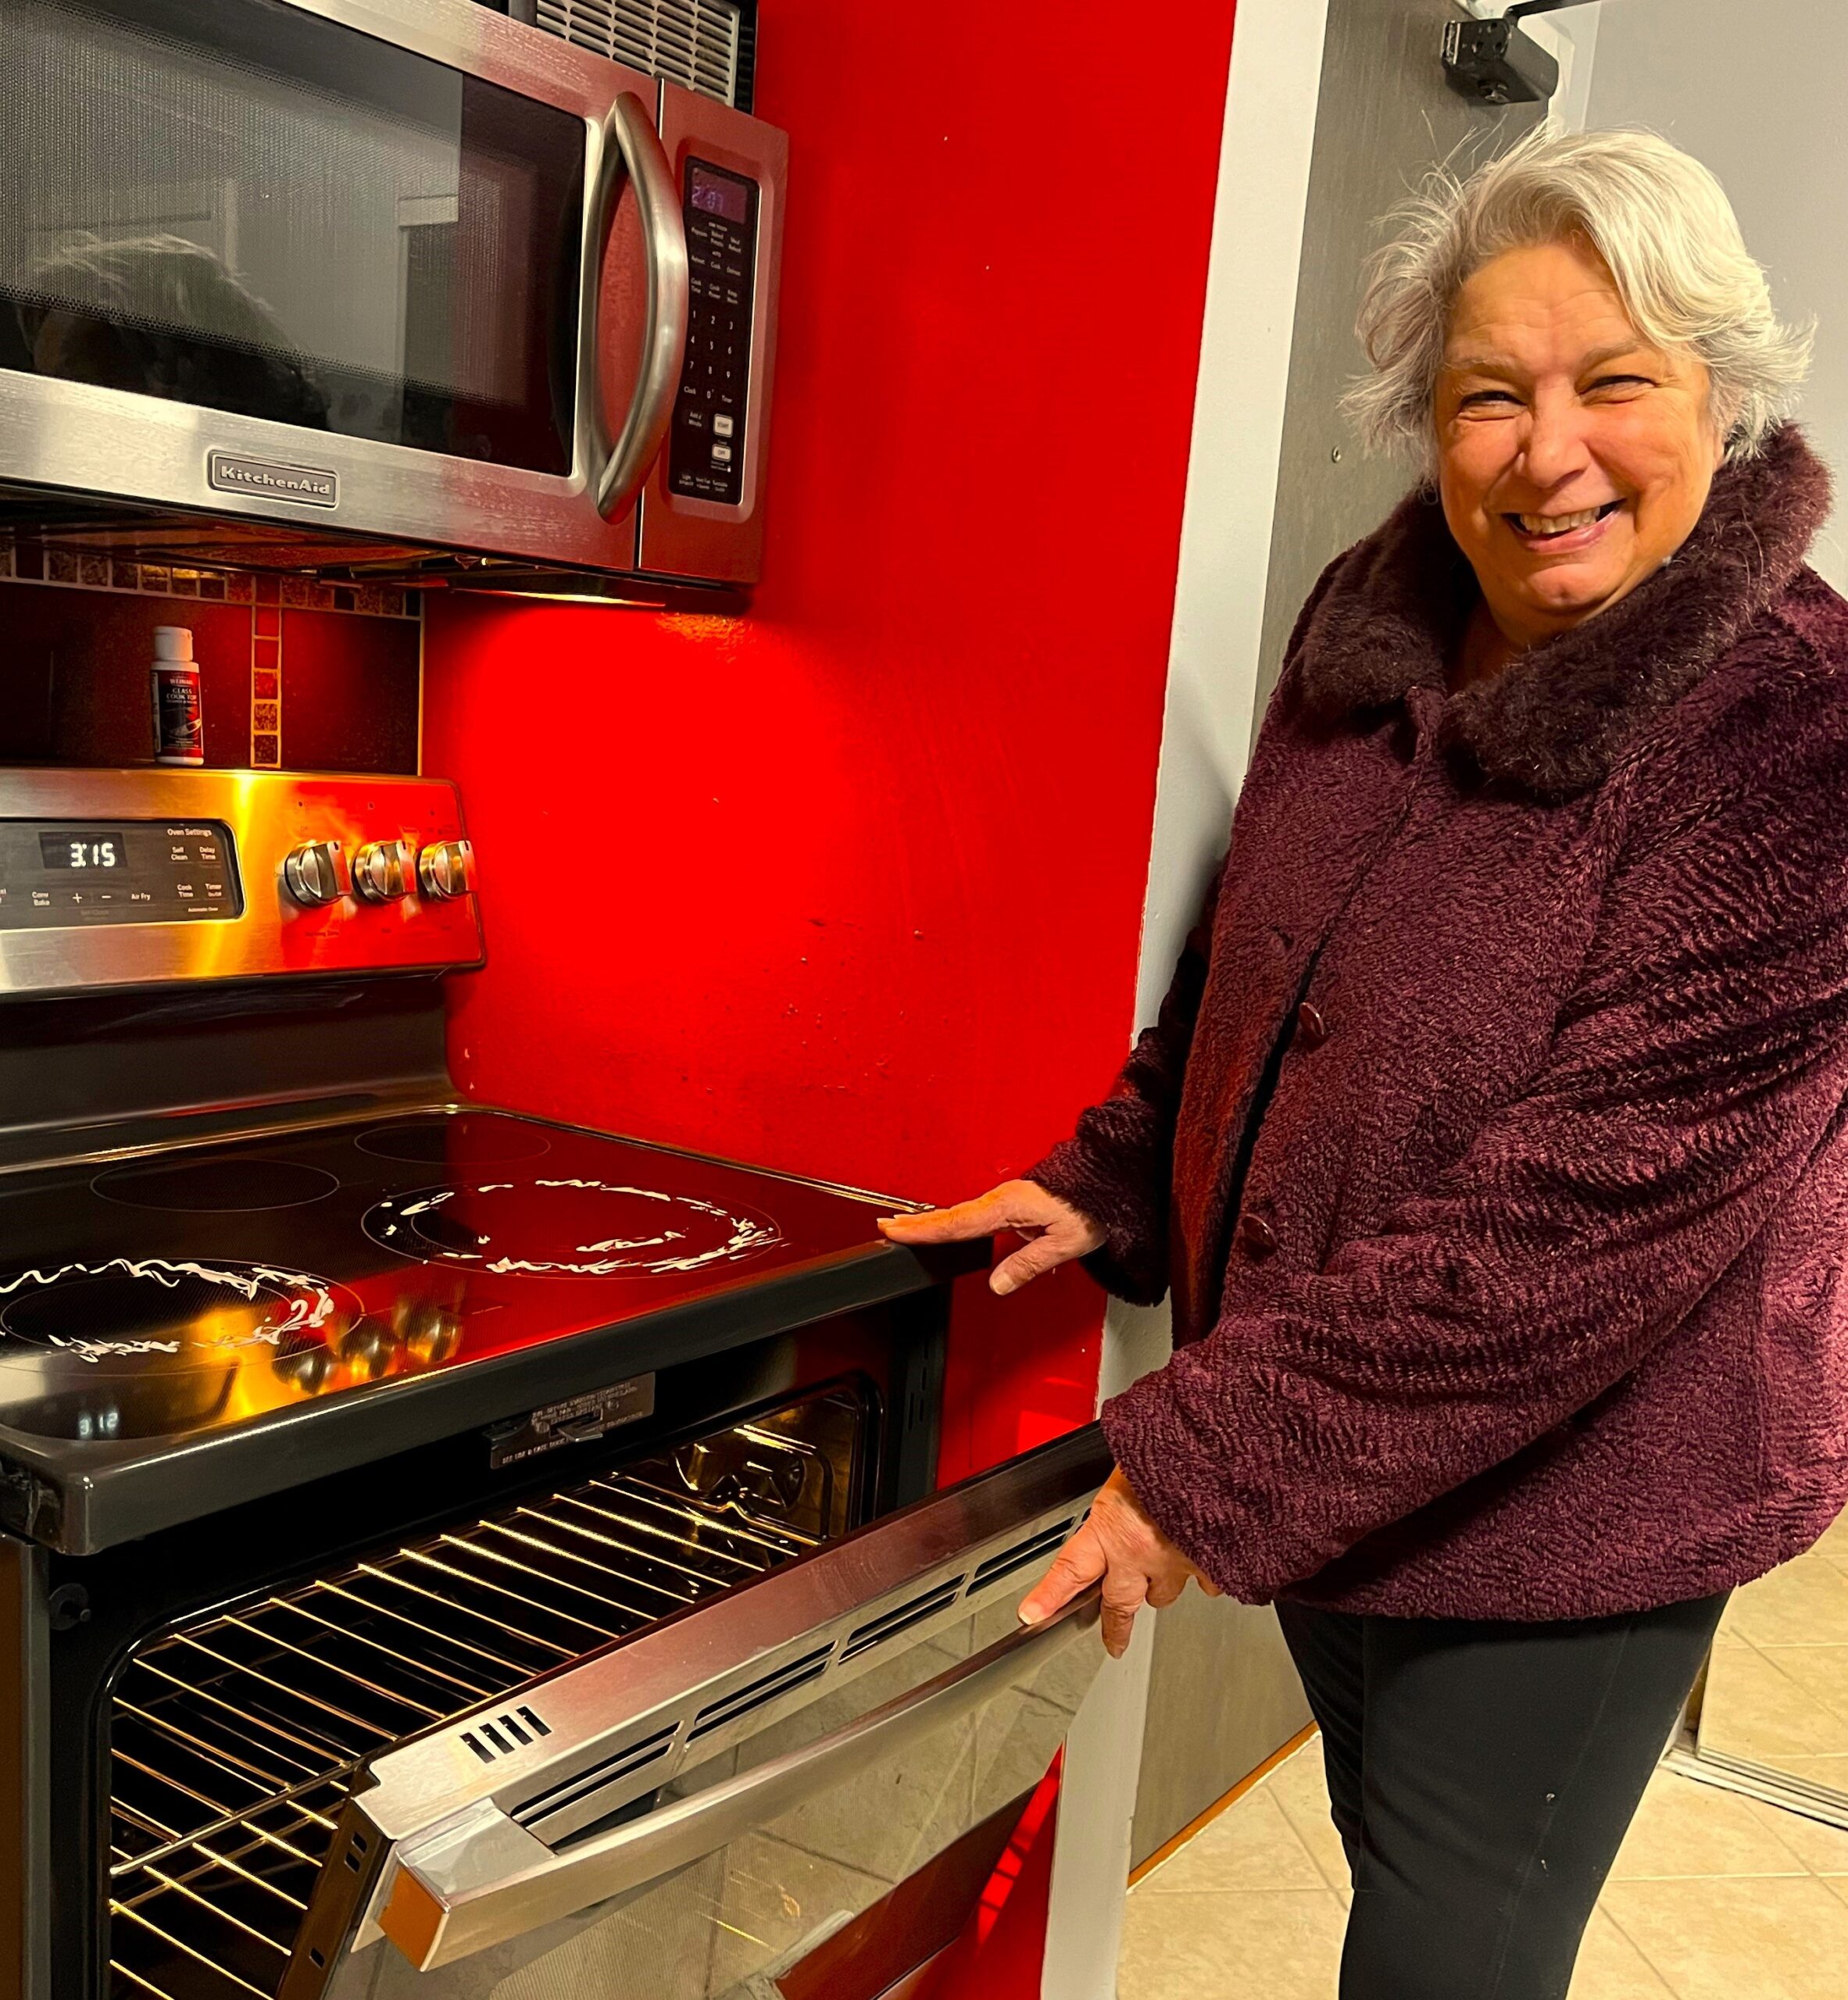 Carmen with her stove